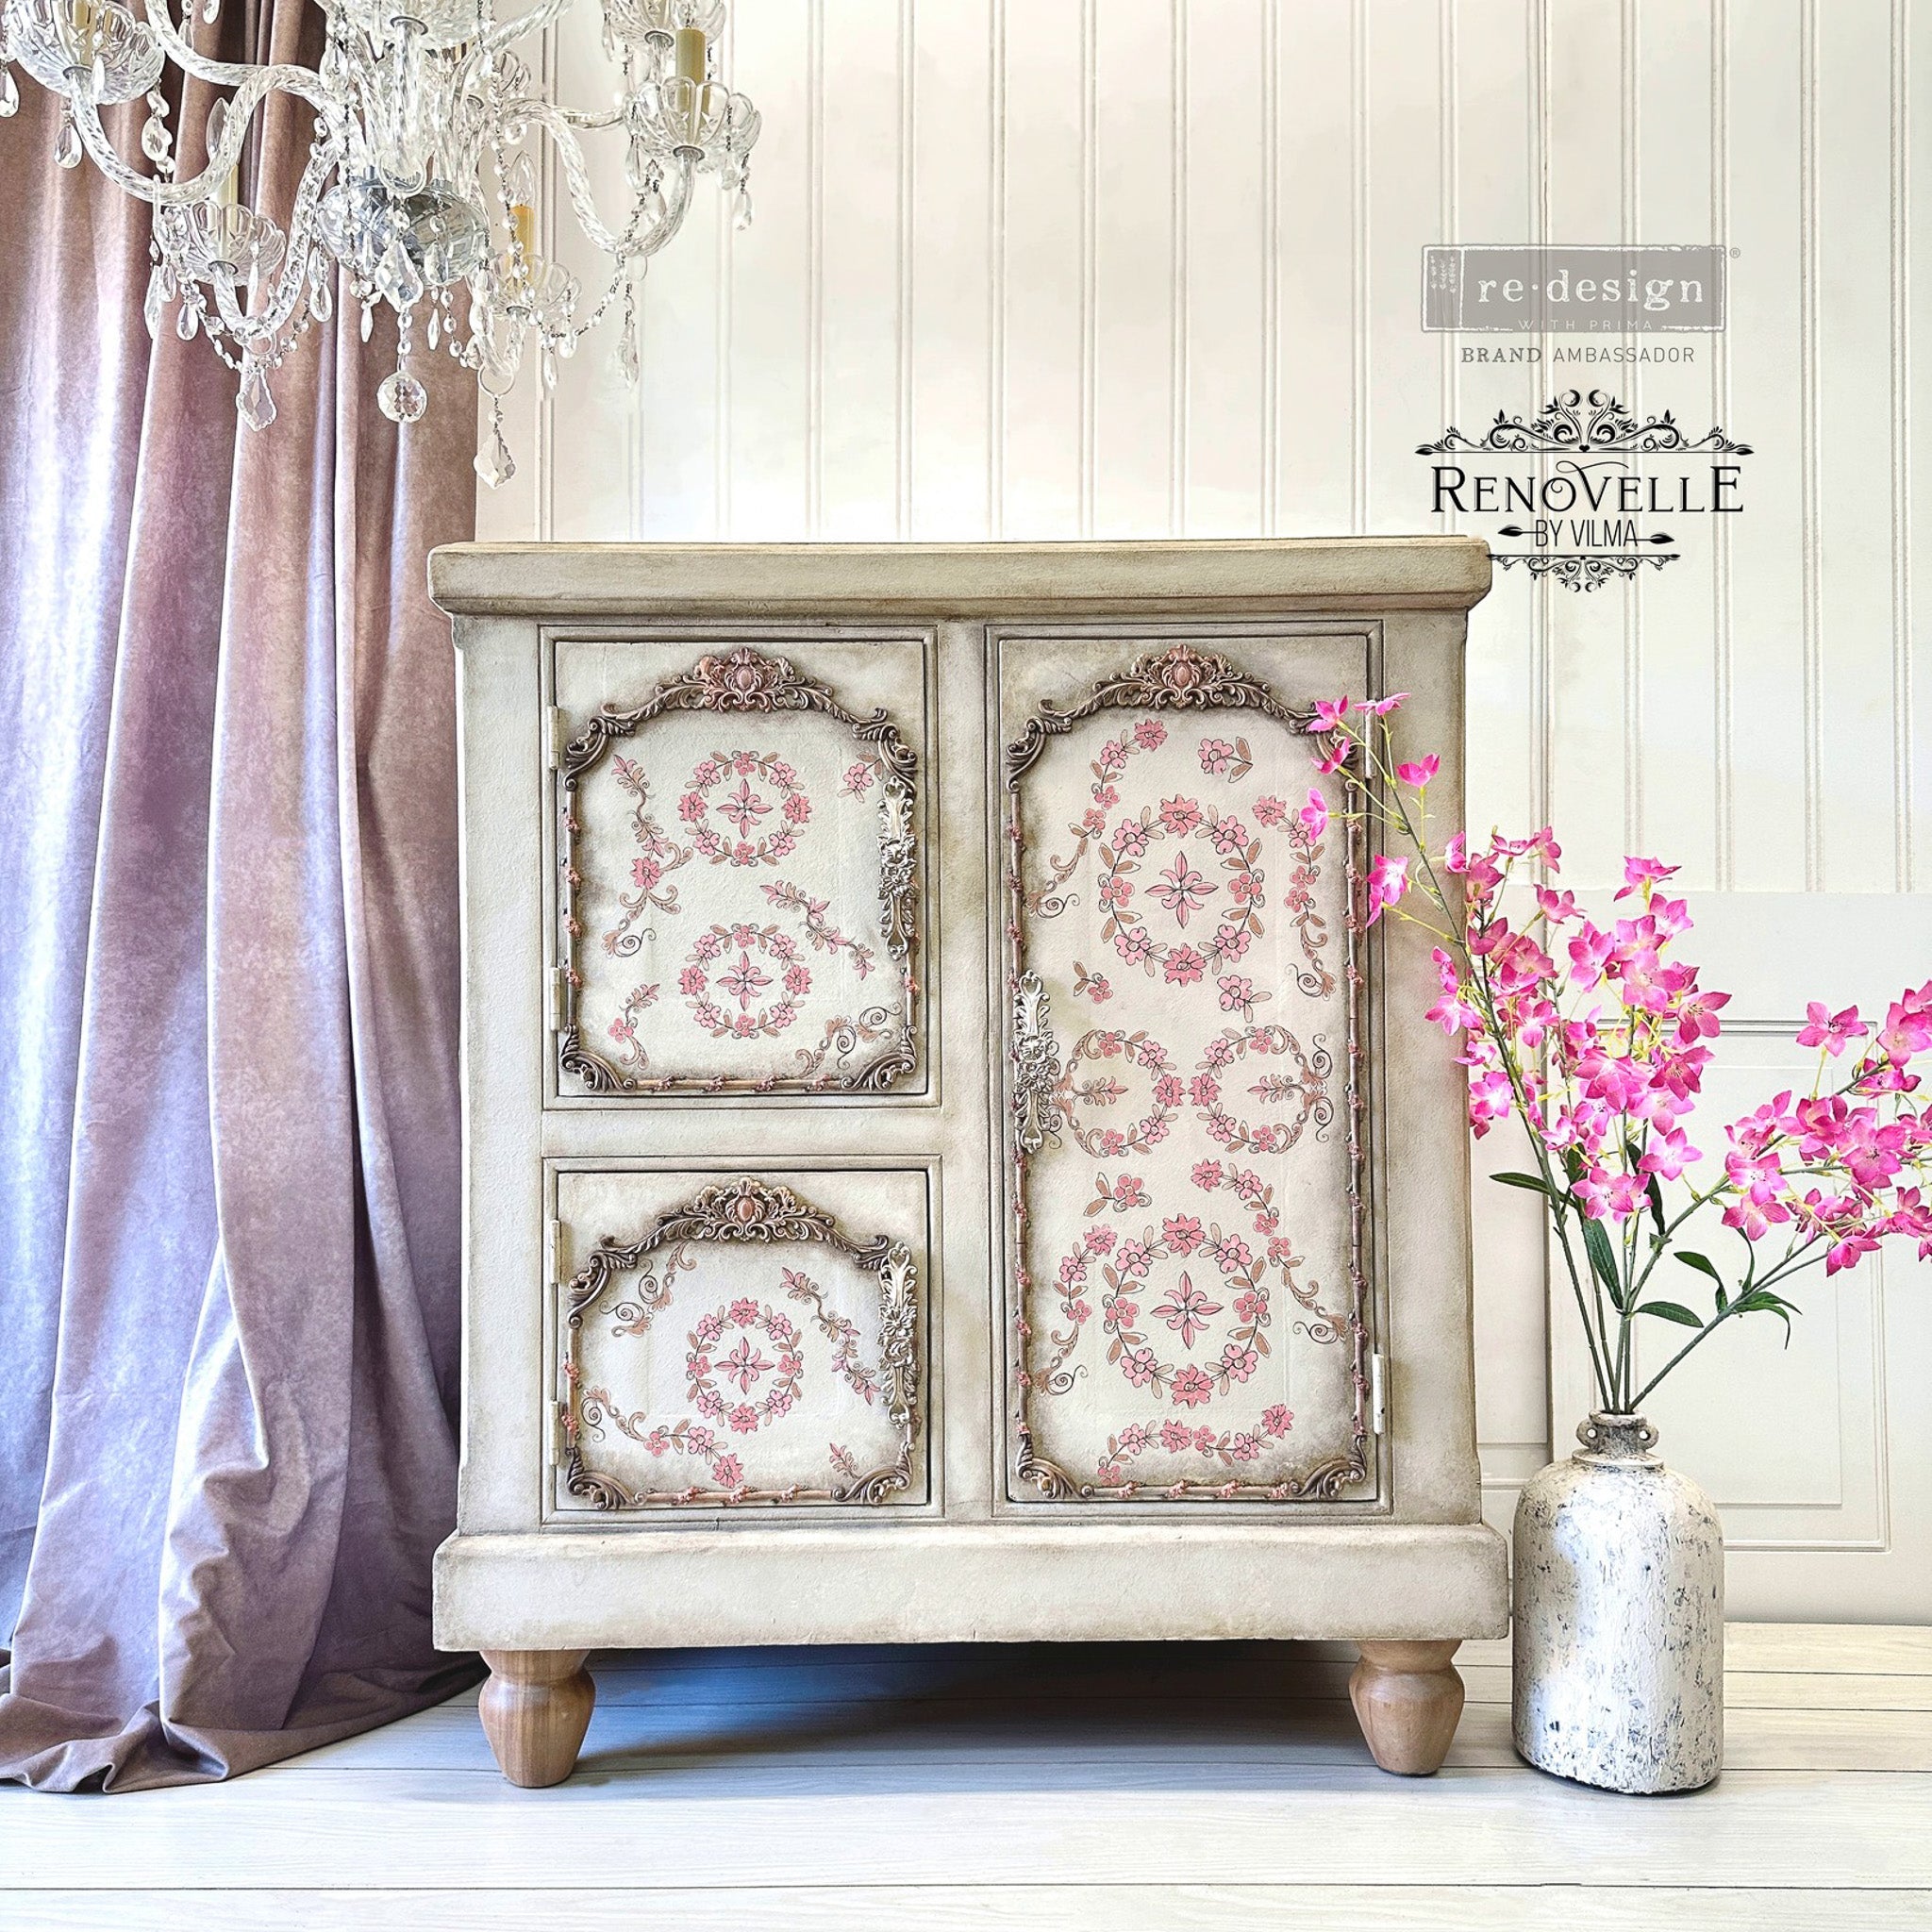 A vintage side table with storage refurbished by Renovelle by Vilma is painted antique white and features ReDesign with Prima's Annie Sloan Flower Garland rub-on transfer on the front of it.